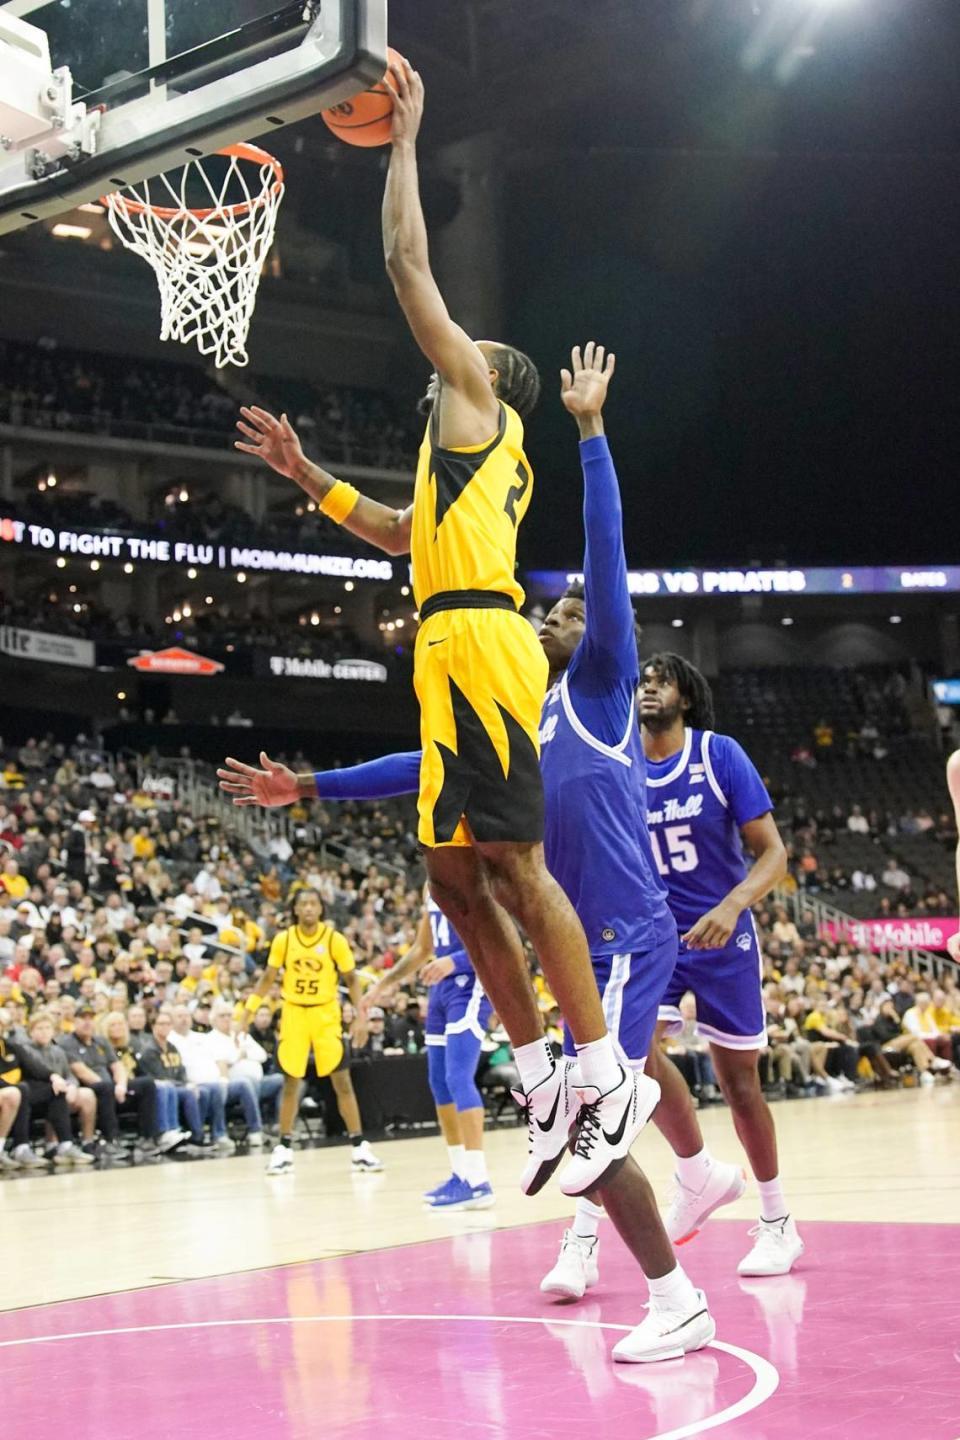 Missouri Tigers guard Tamar Bates, who played at Piper High School in nearby Kansas City, Kan., scores over Seton Hall Pirates guard Al-Amir Dawes during Sunday afternoon’s men’s basketball game at T-Mobile Center in Kansas City.